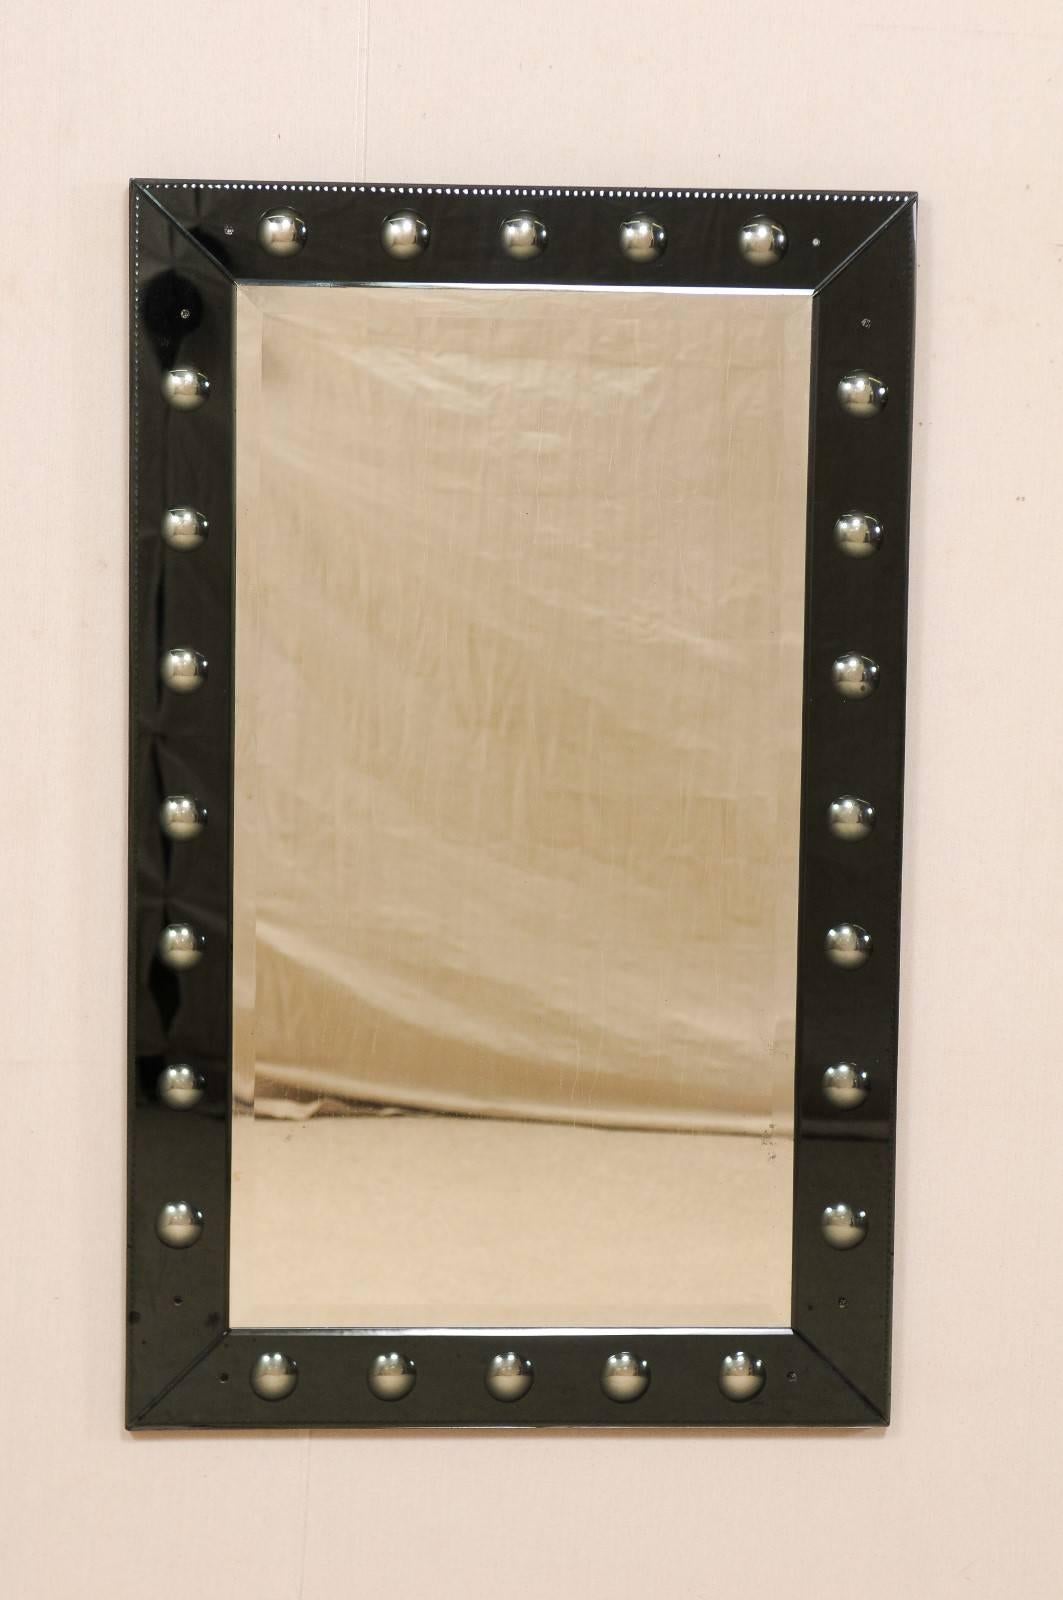 A vintage American mirror with bullseye surround. This American rectangular shaped mirror is adorn with a series of small convex bullseyes throughout its border. The mirrored bullseyes are recessed beneath a tinted black glass surround, so that the